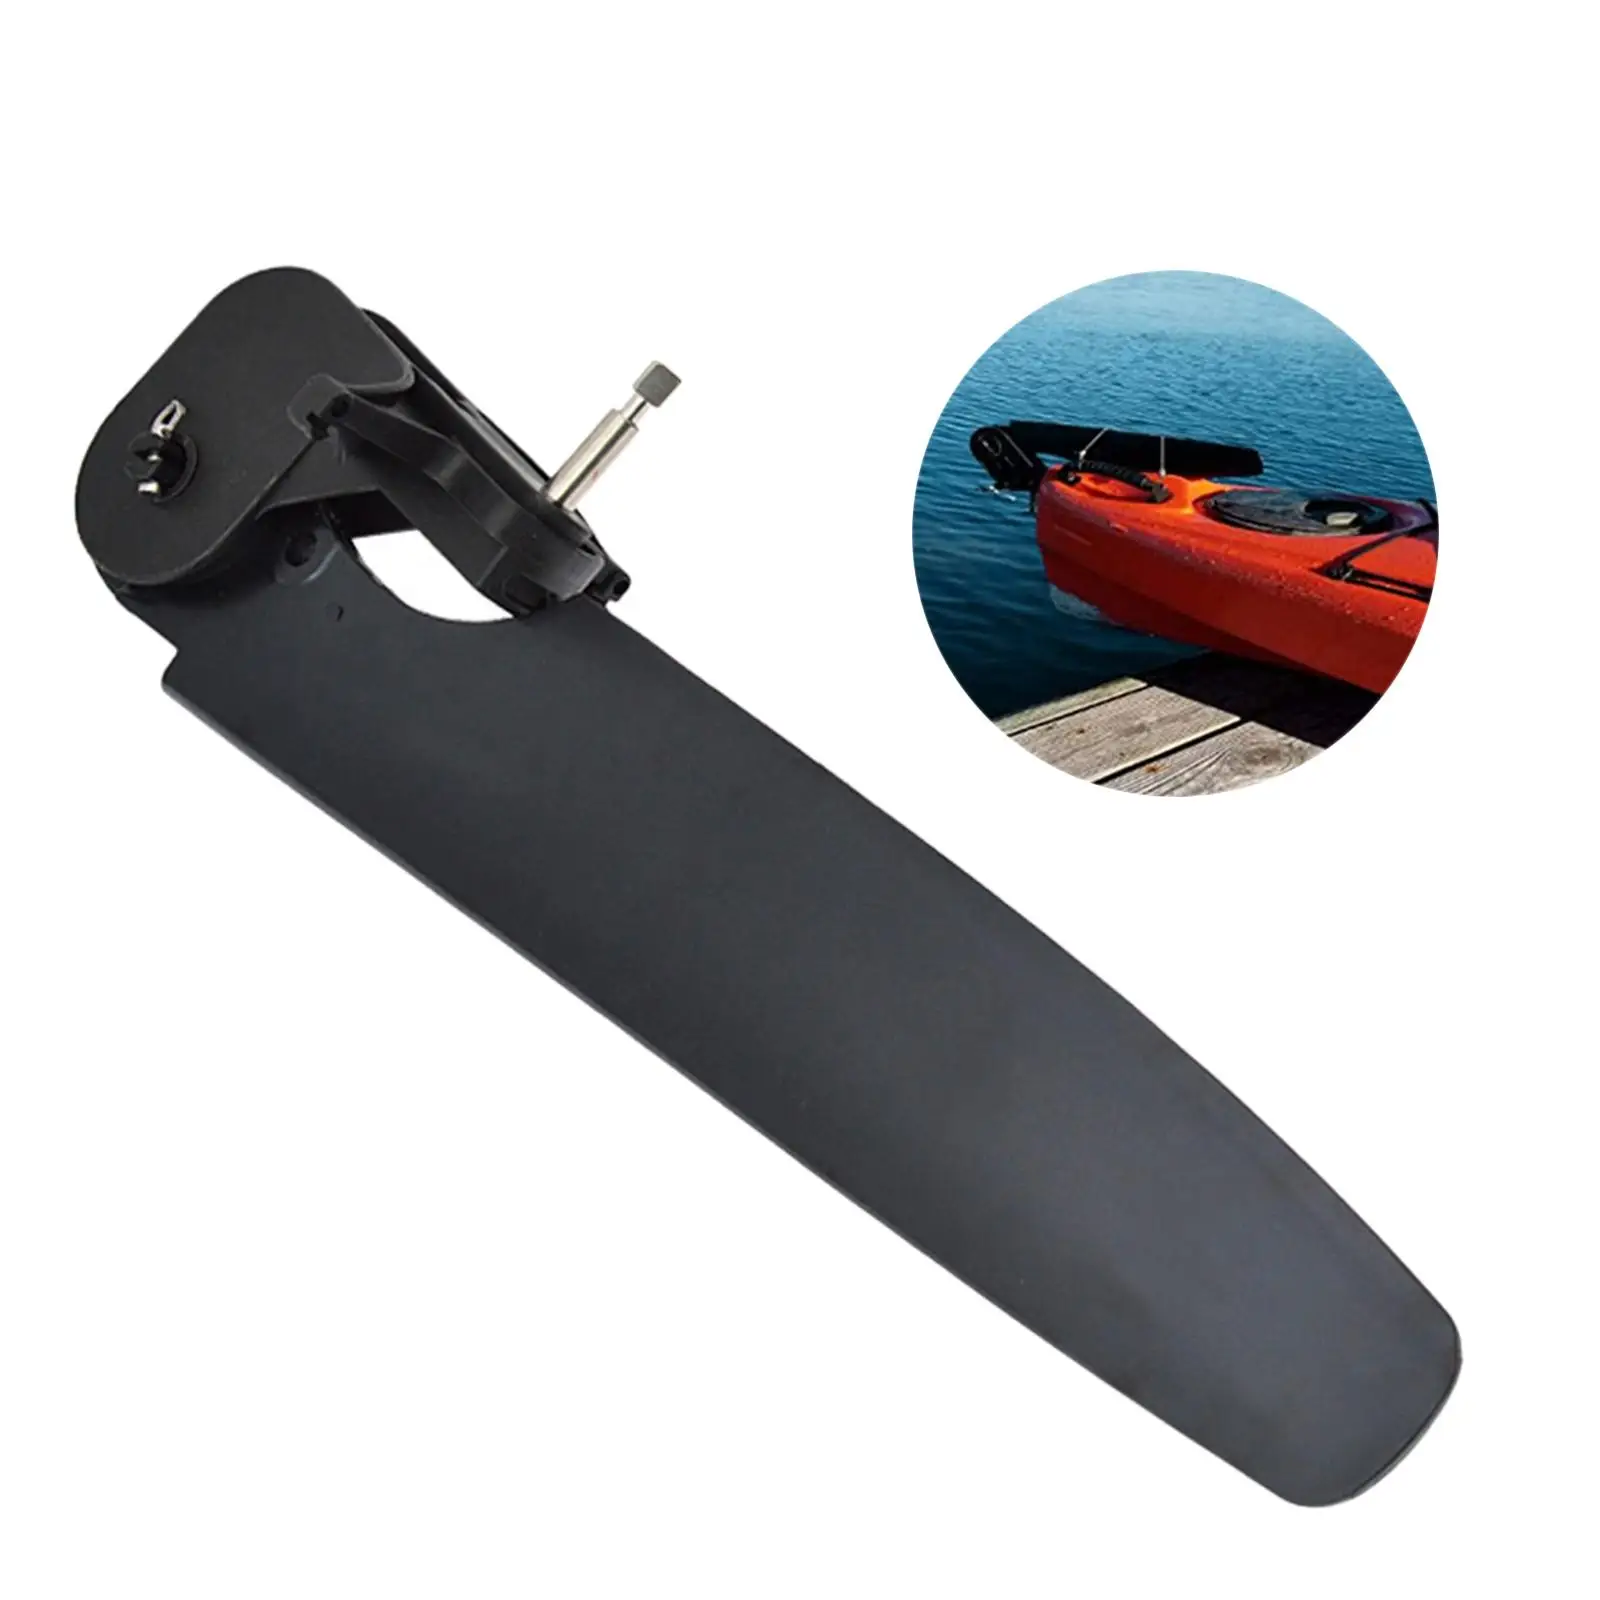 Kayak Boat Rudder Adjustable Direction Fishing Rear Tail Steering System Foot Control Steering System Kayak Accessories